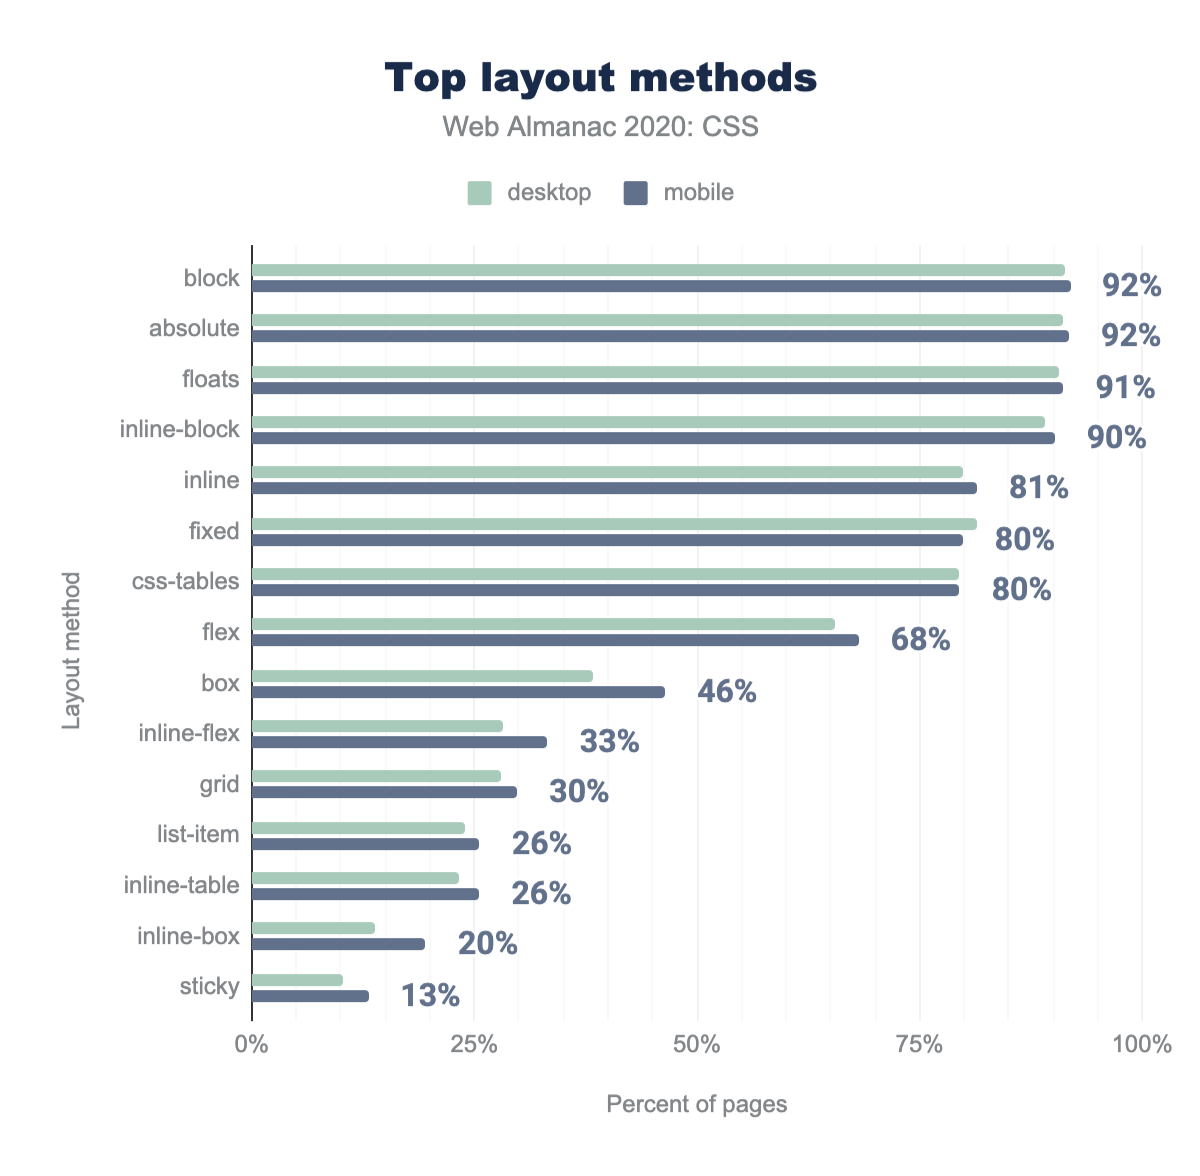 Layout modes and percentage of pages they appear on. This data is a combination of certain values from the display, position, and float properties.